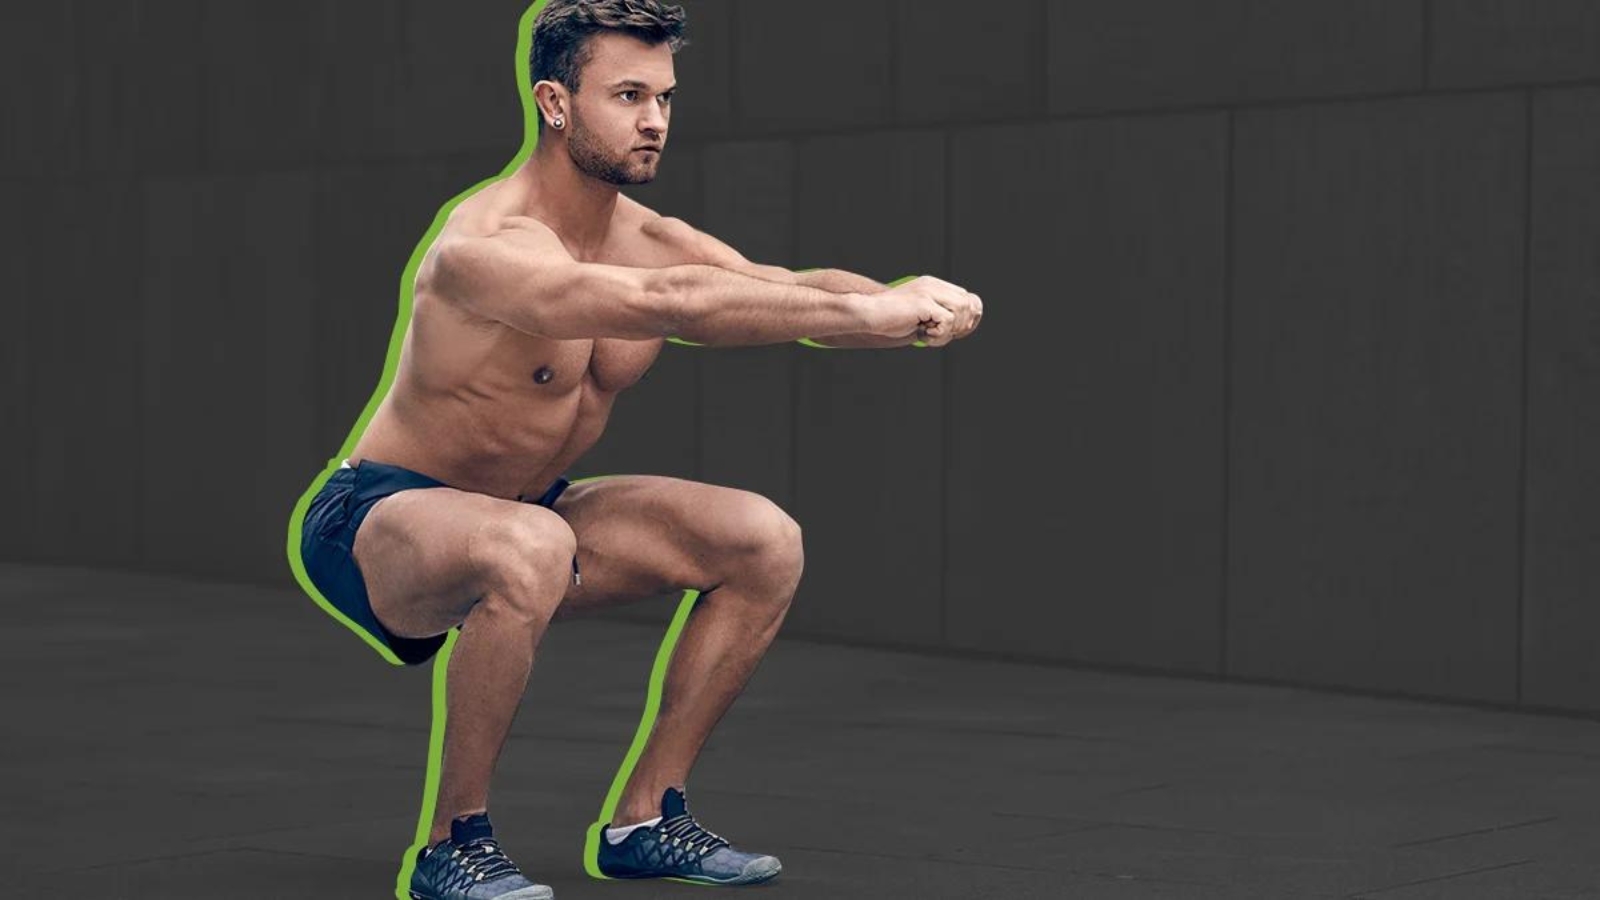 Can you build muscle and strength with bodyweight exercises?